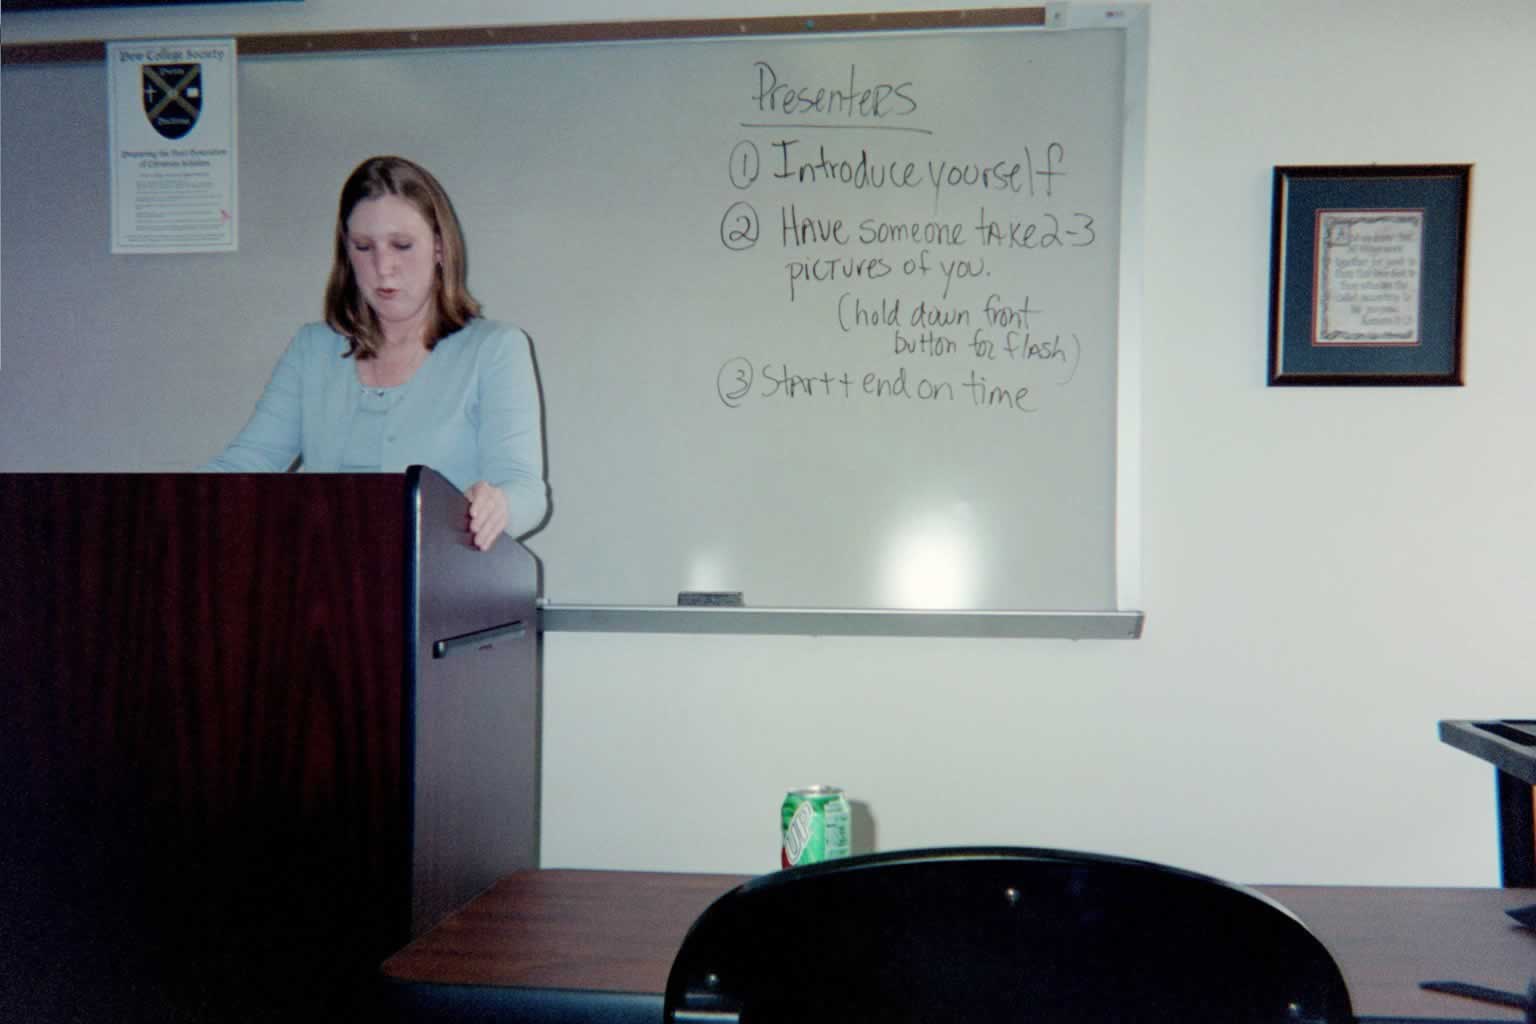 picture of a woman standing behind a podium looking down